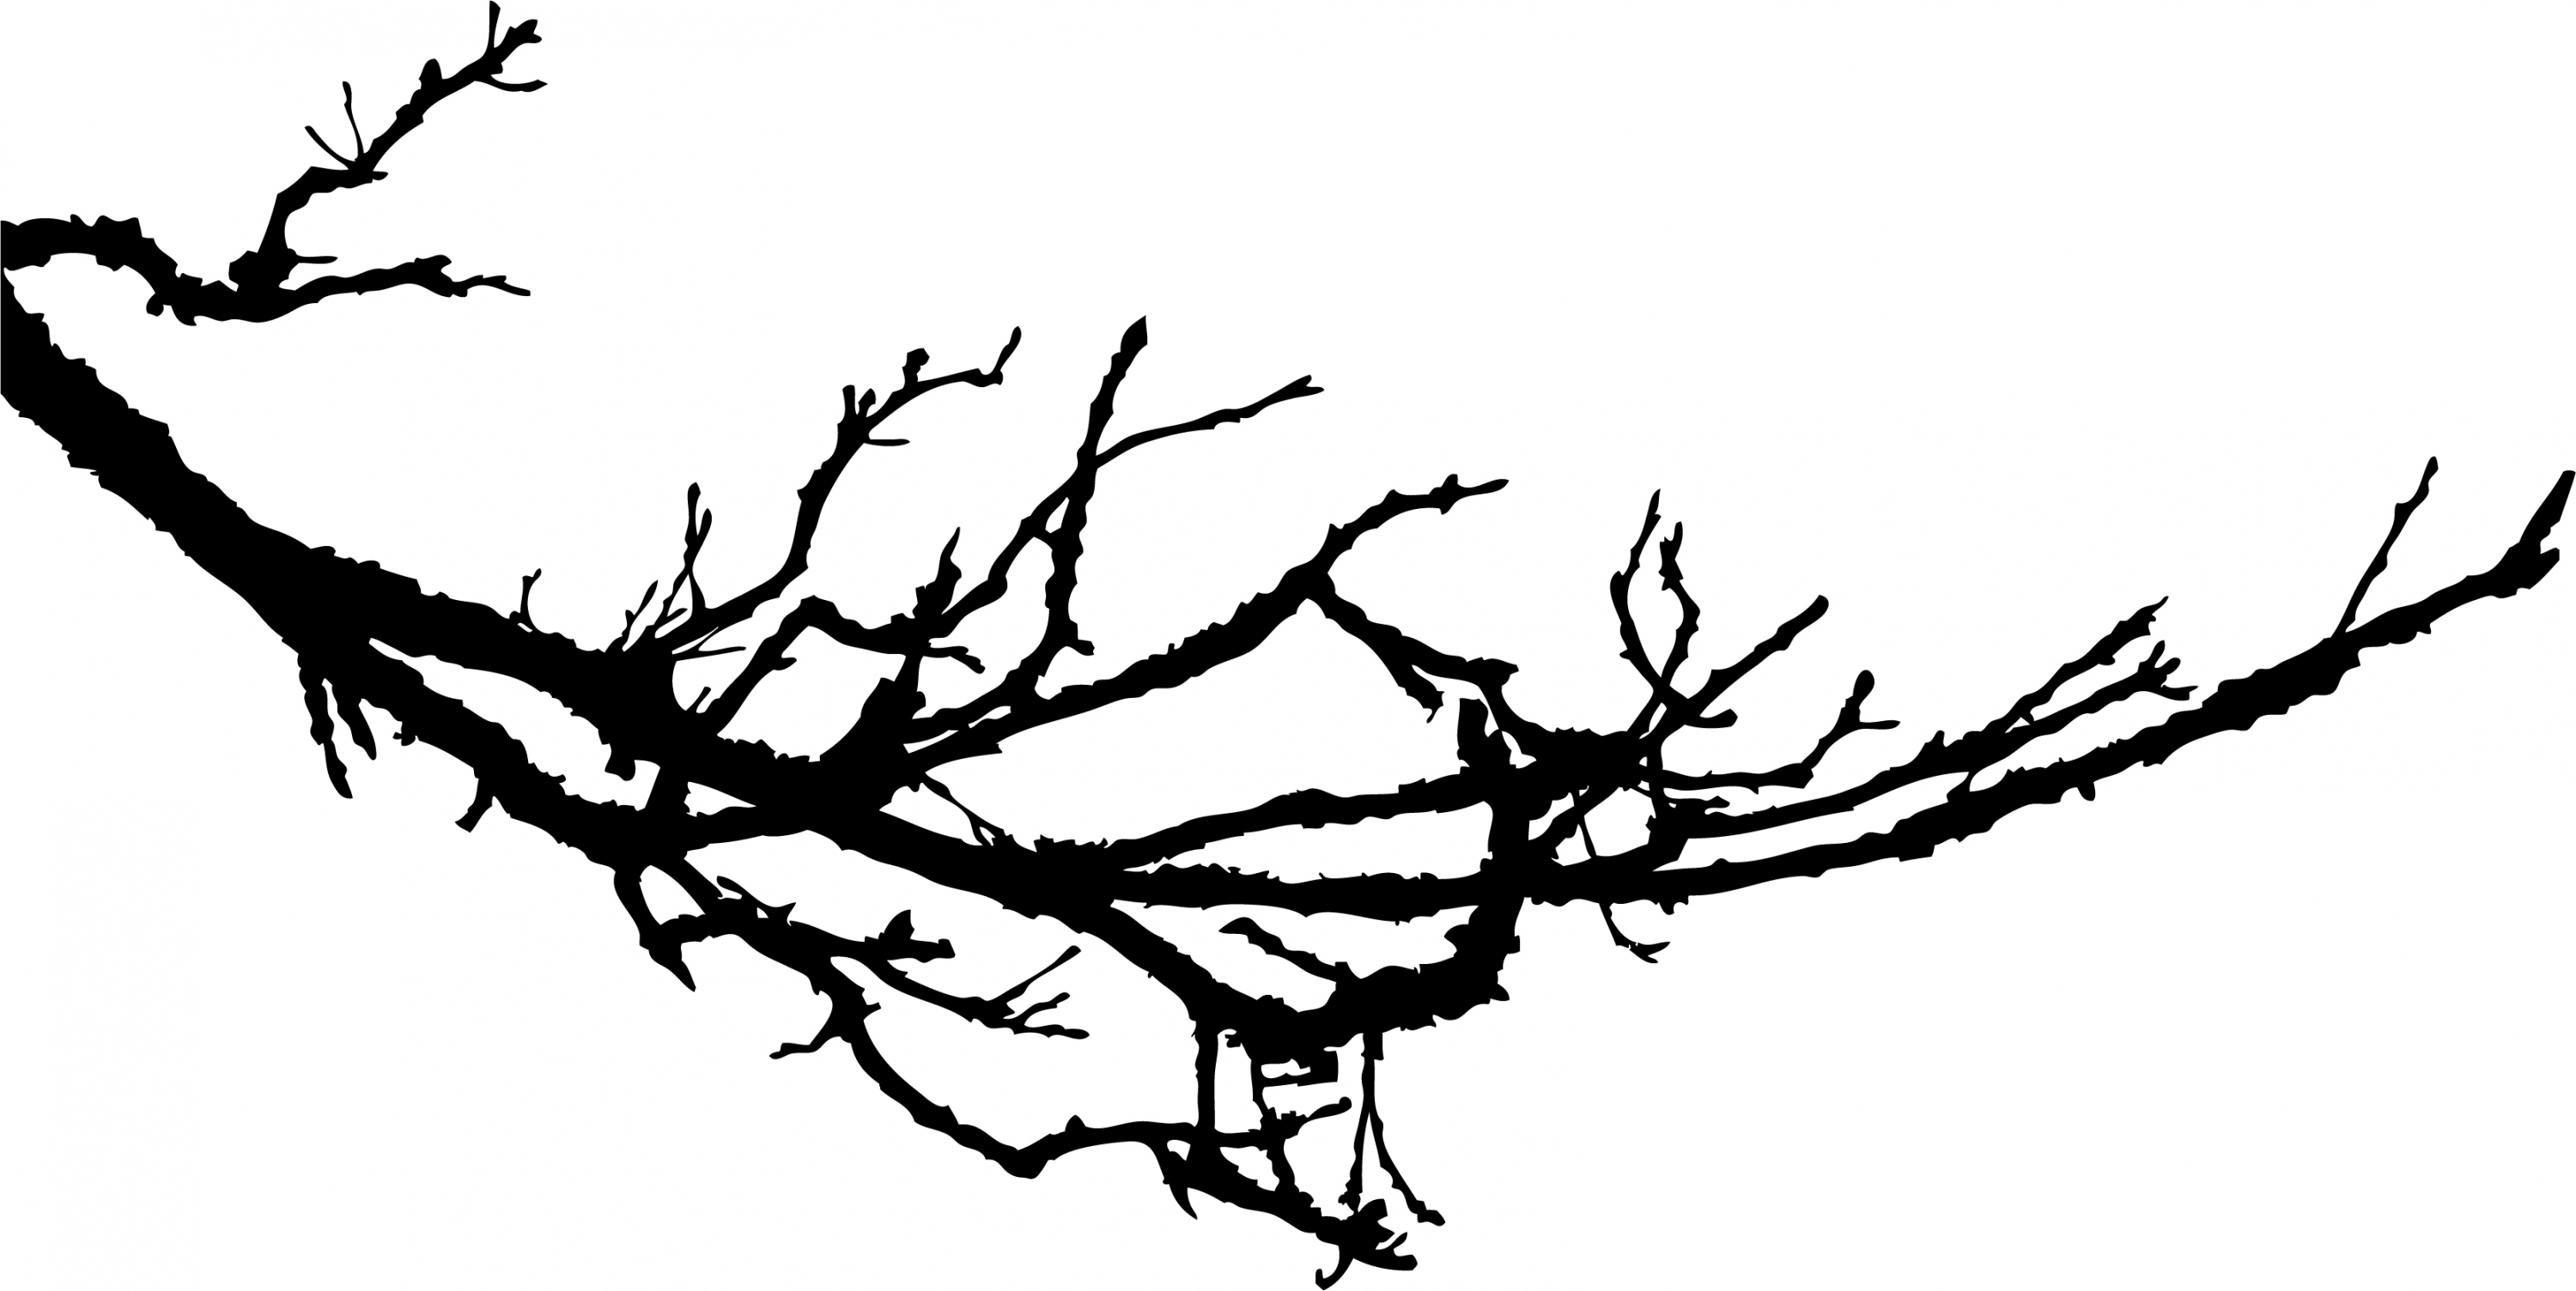 Tree branch silhouette clipart